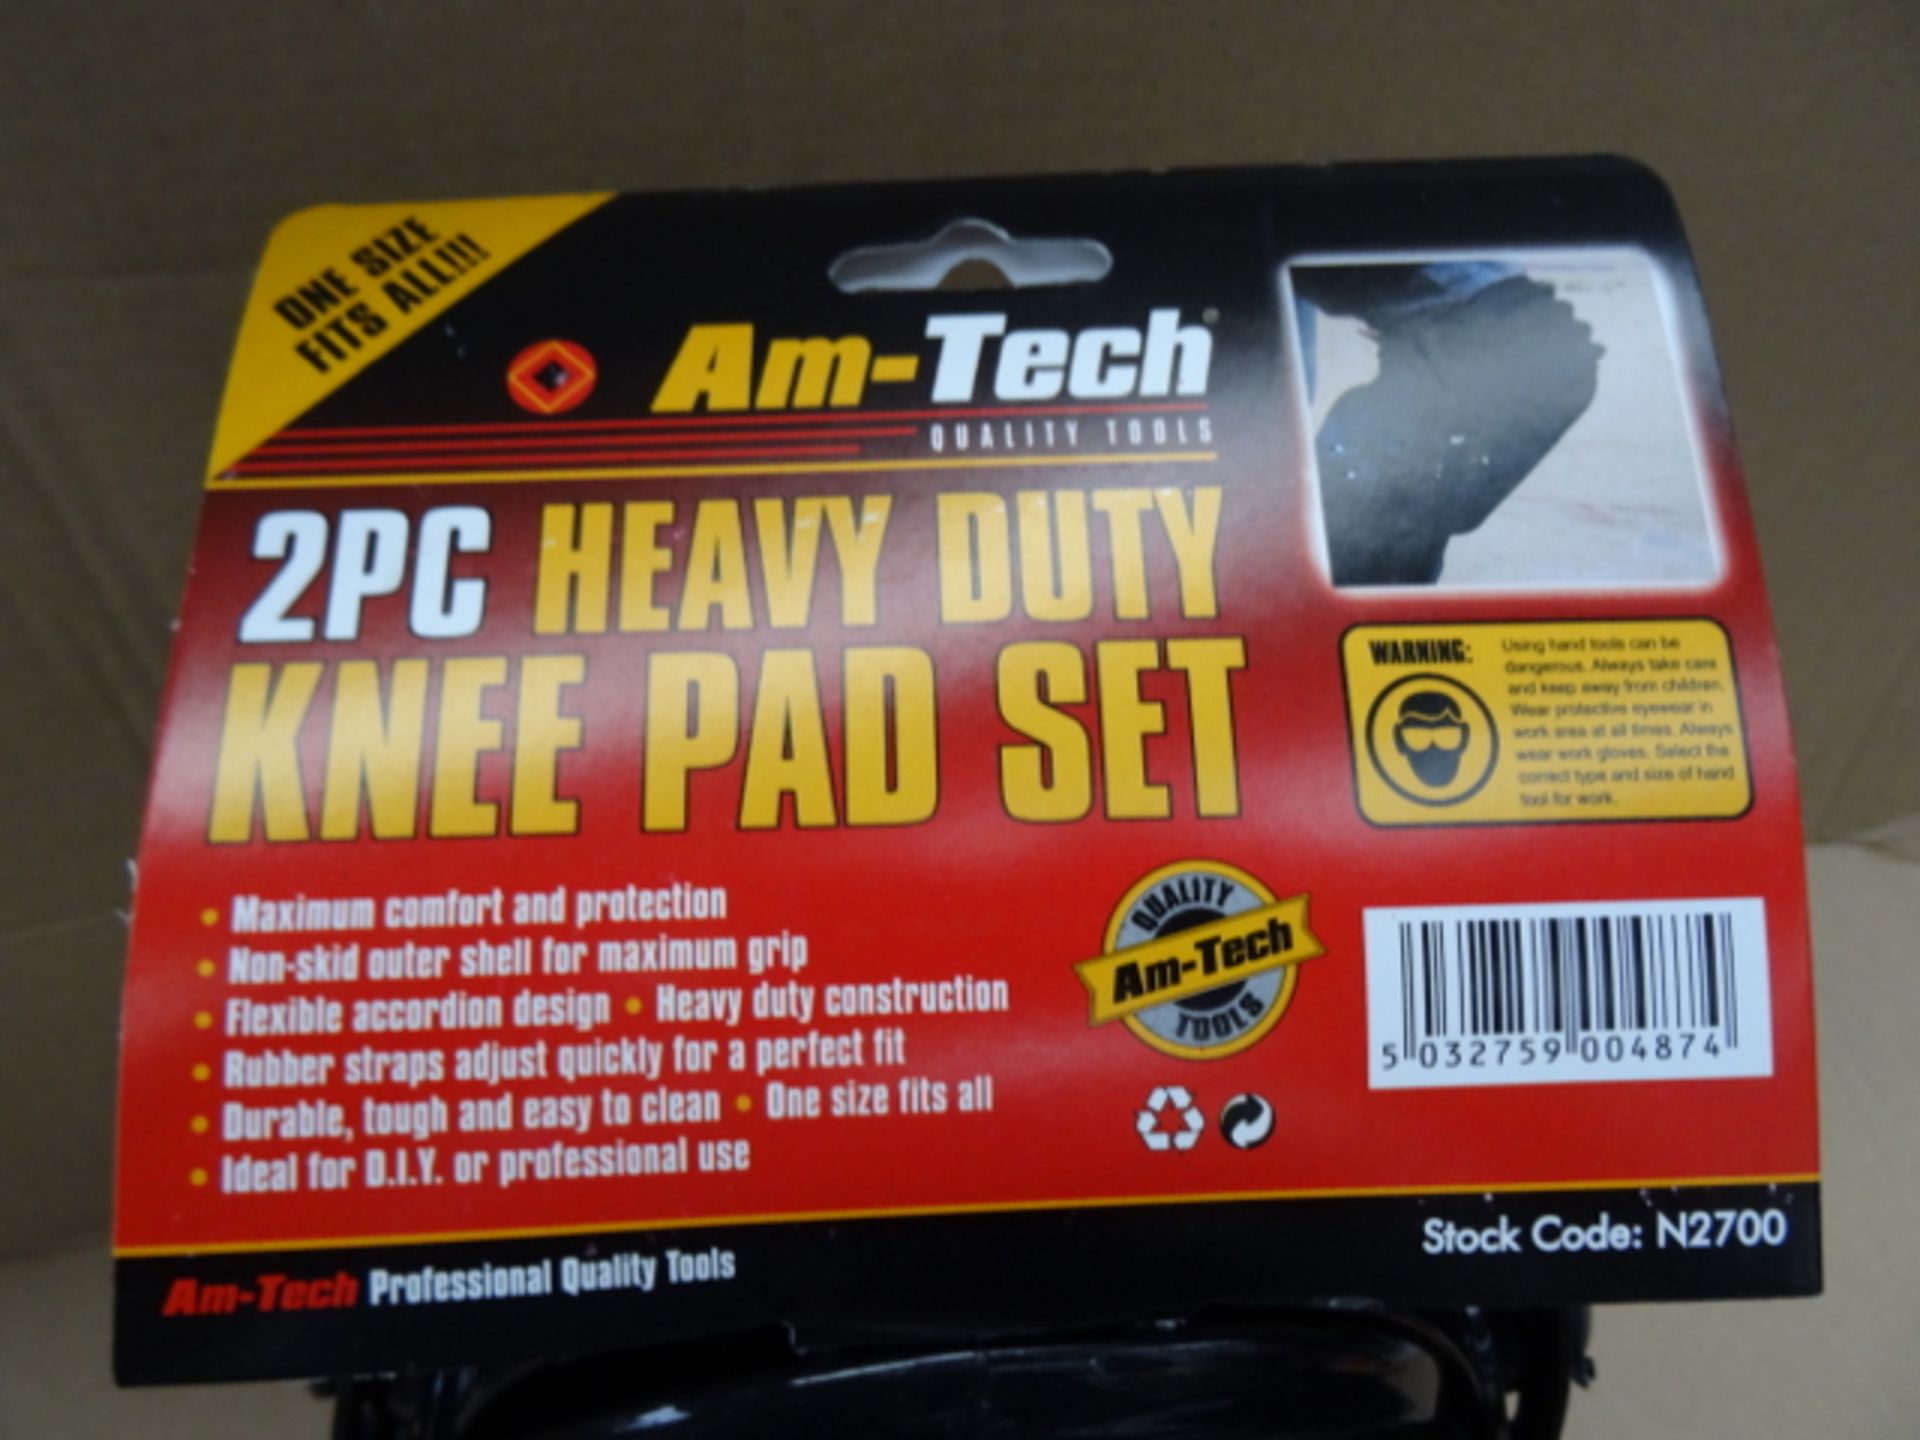 20 x Am-Tech Quality Tools. 2 Piece Heavy Duty Knee Pad Set. One Size fits all. Very high quality! - Image 3 of 3